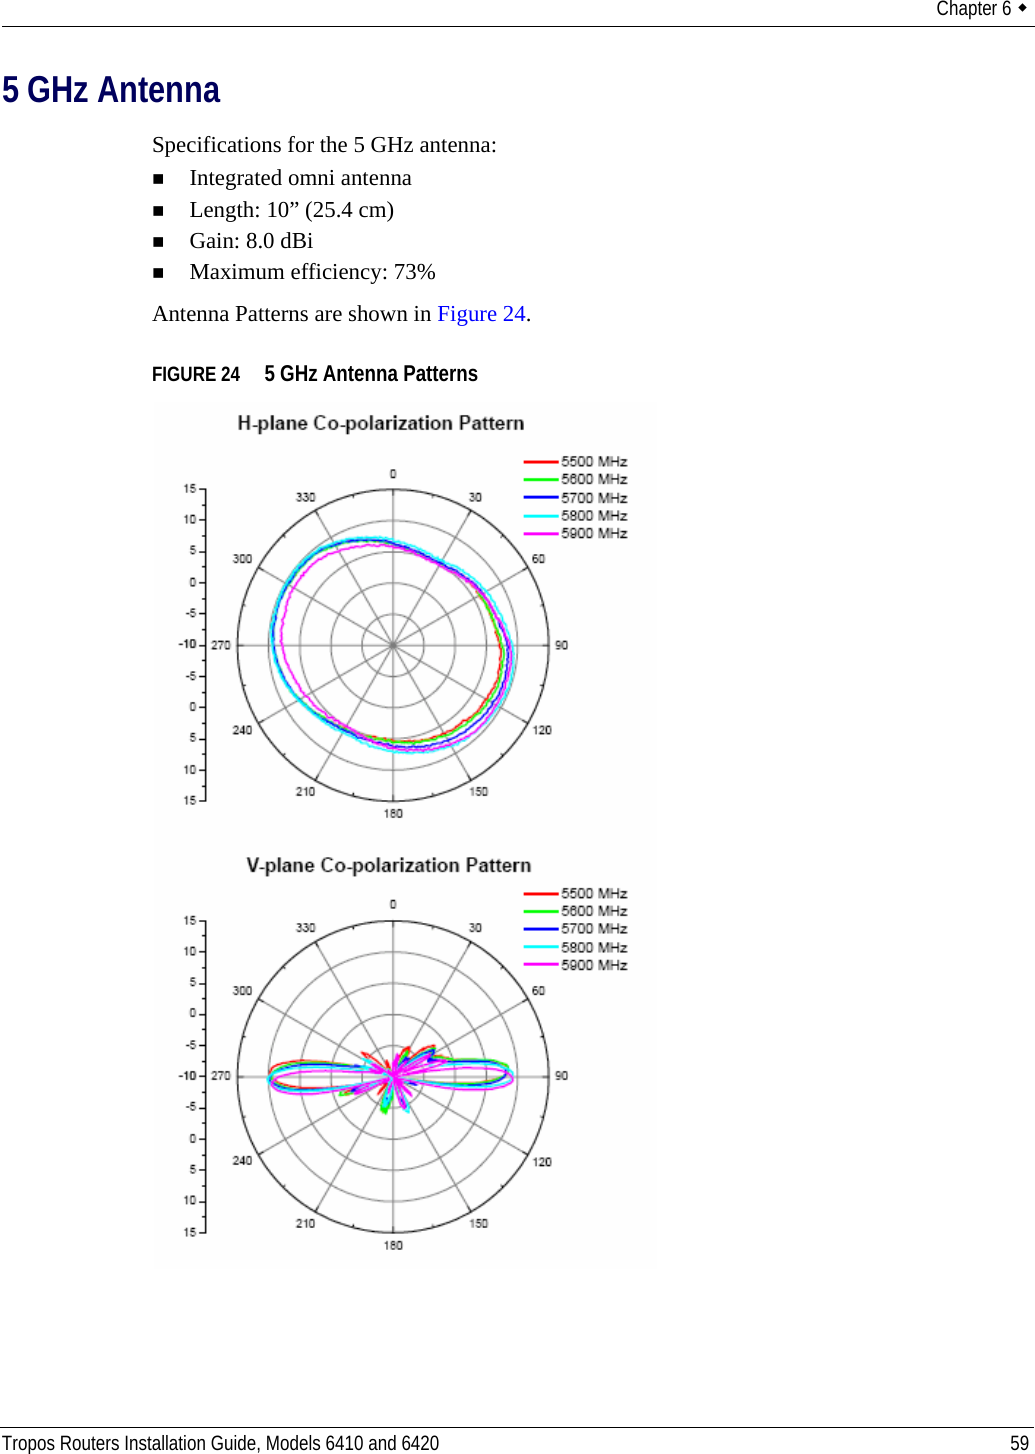 Chapter 6  Tropos Routers Installation Guide, Models 6410 and 6420 595 GHz AntennaSpecifications for the 5 GHz antenna:Integrated omni antennaLength: 10” (25.4 cm)Gain: 8.0 dBiMaximum efficiency: 73% Antenna Patterns are shown in Figure 24.FIGURE 24   5 GHz Antenna Patterns